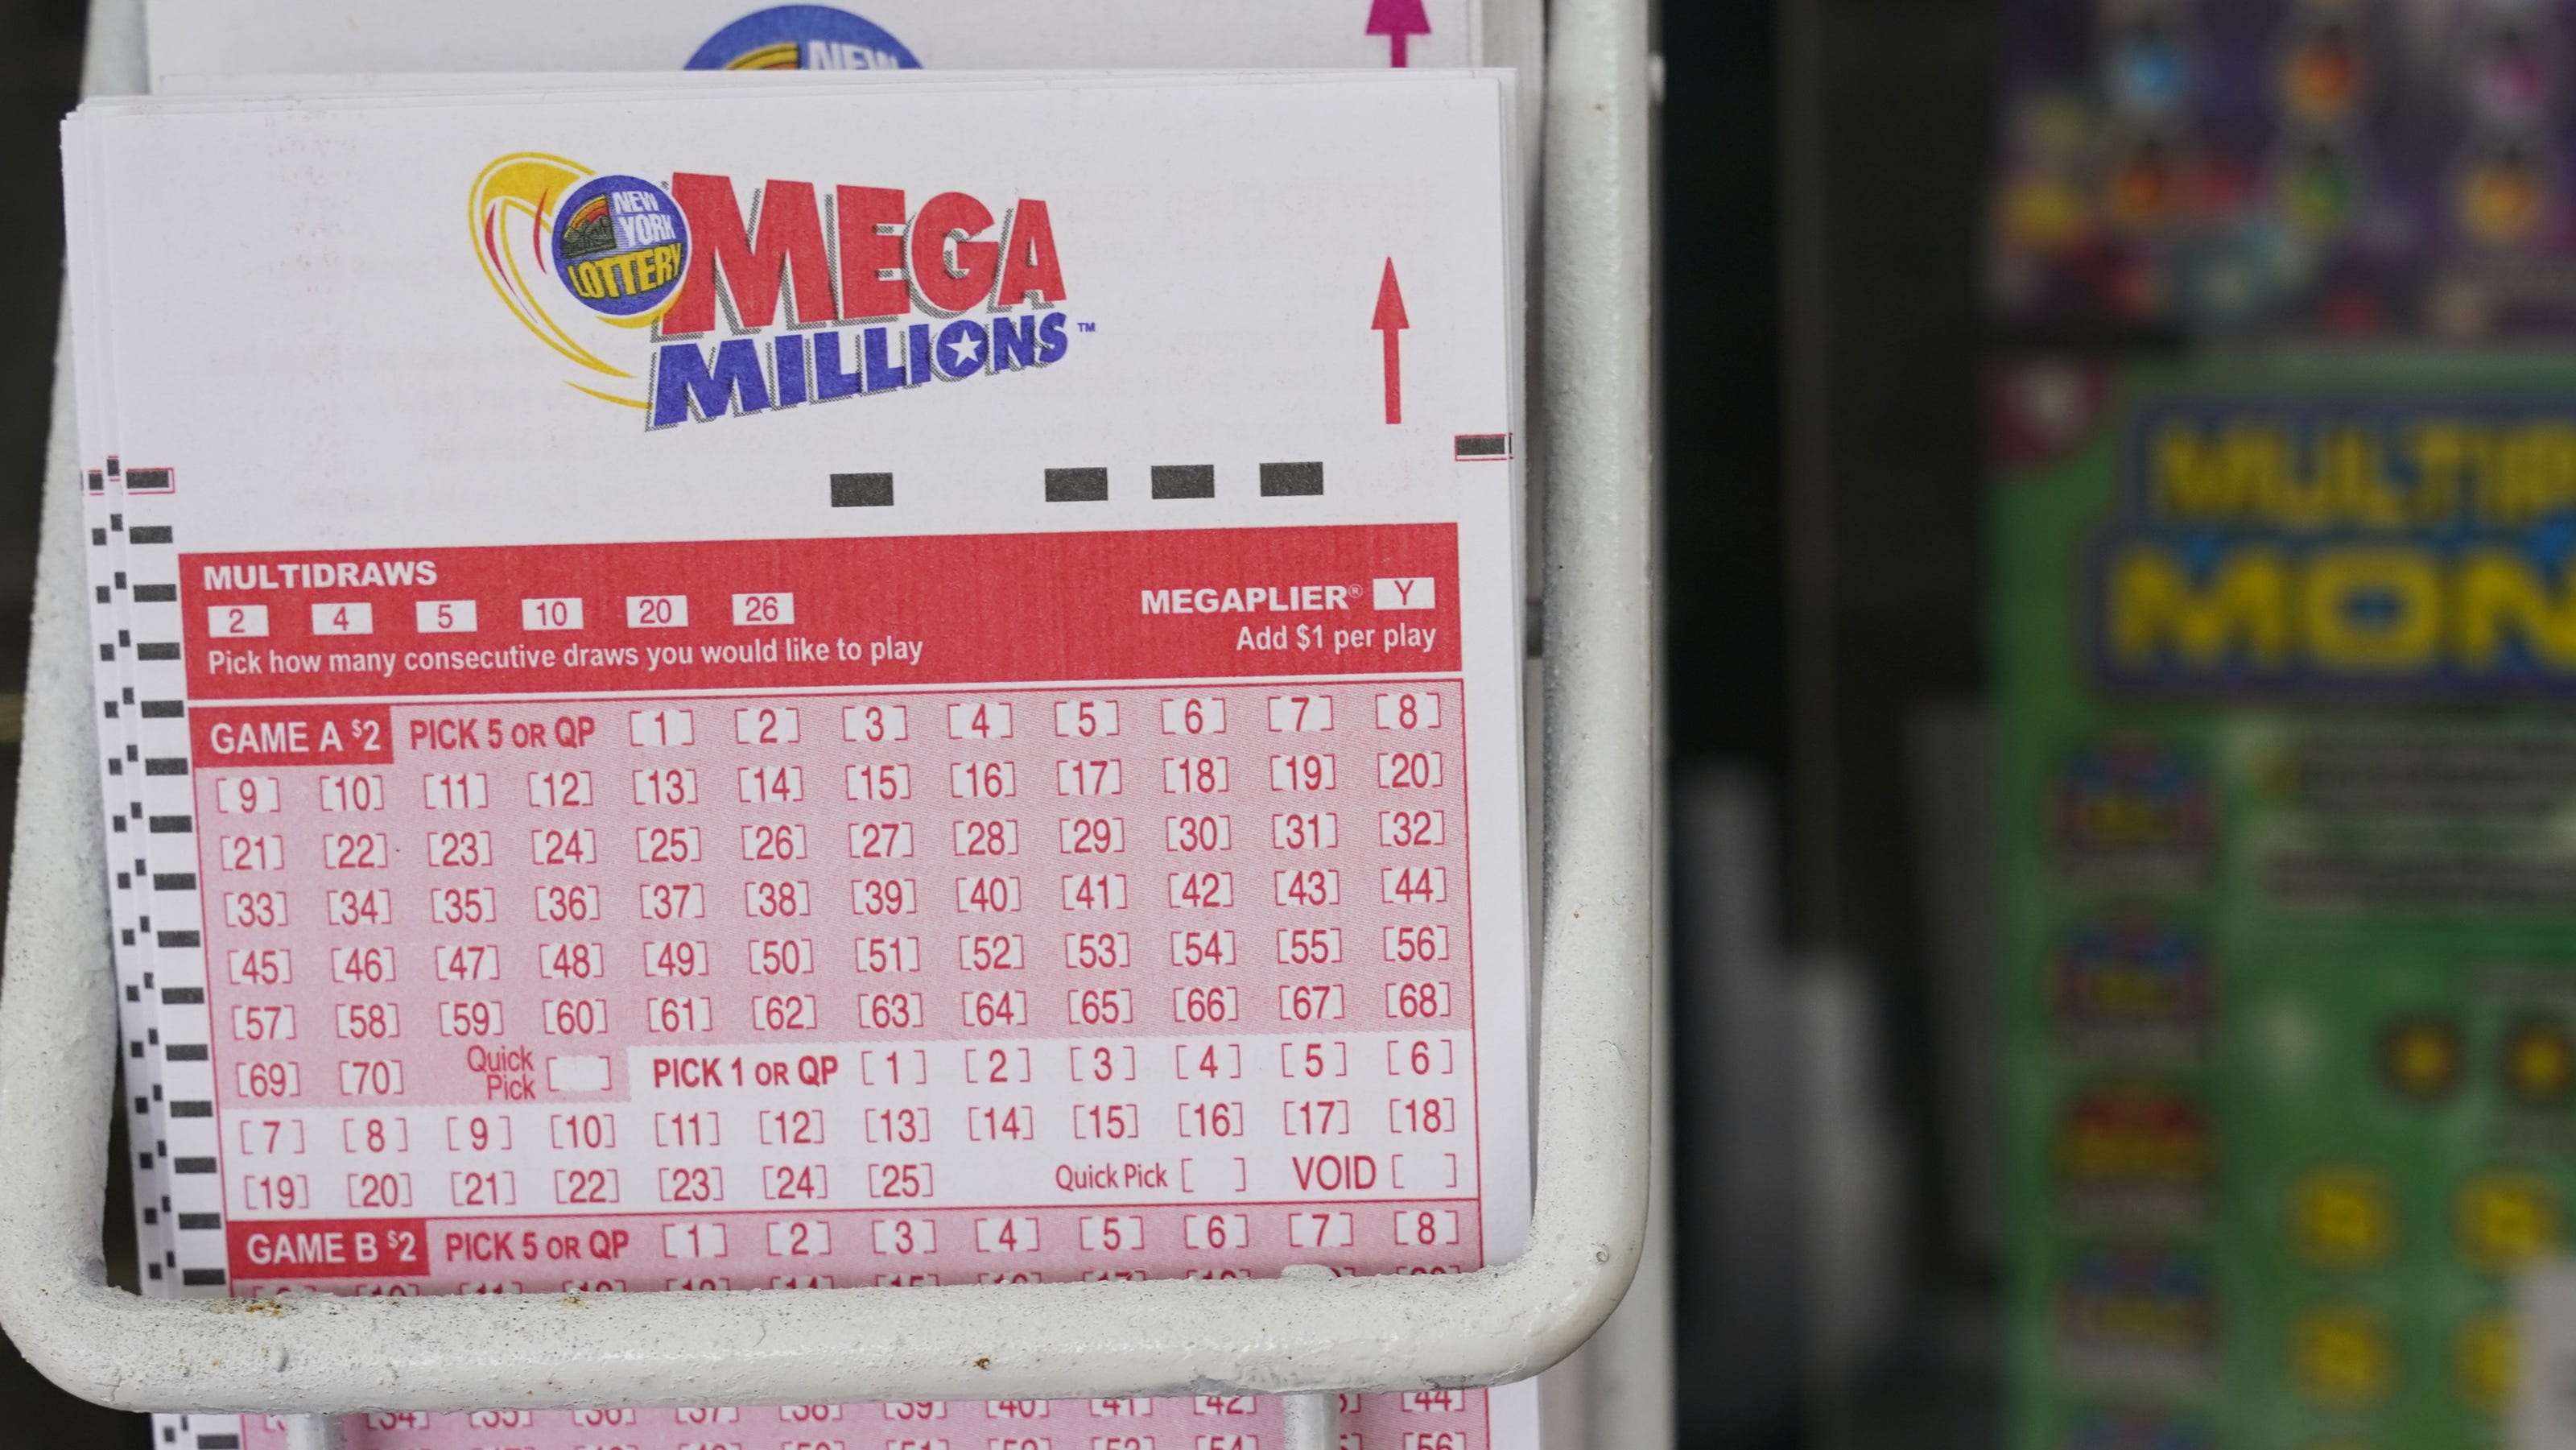 Winning Powerball numbers KY lottery drawing for 2/1, 700M jackpot